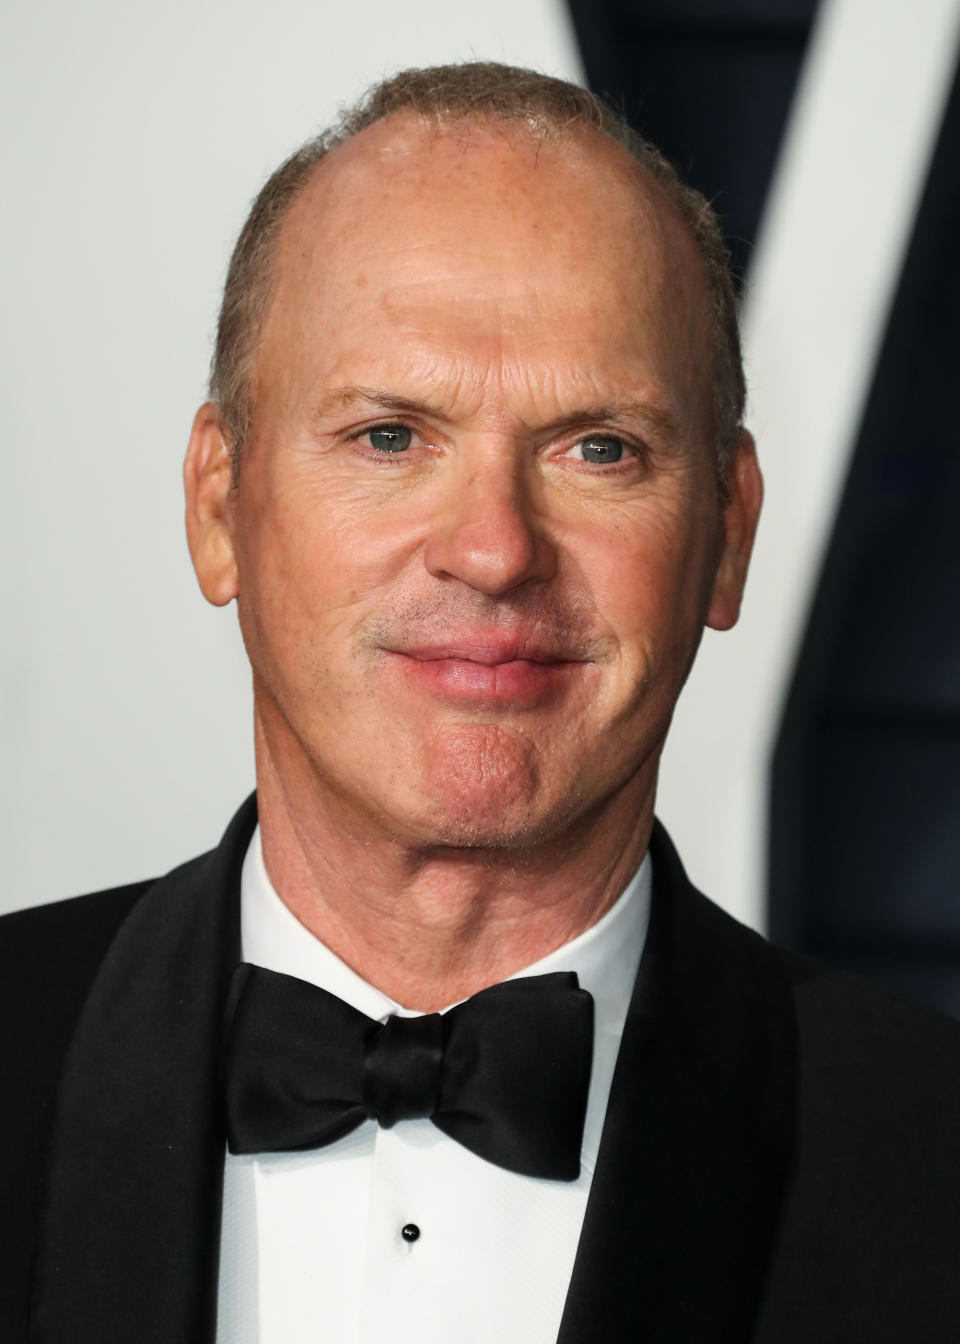 BEVERLY HILLS, LOS ANGELES, CA, USA - FEBRUARY 24: Michael Keaton arrives at the 2019 Vanity Fair Oscar Party held at the Wallis Annenberg Center for the Performing Arts on February 24, 2019 in Beverly Hills, Los Angeles, California, United States. (Photo by Xavier Collin/Image Press Agency/Sipa USA)